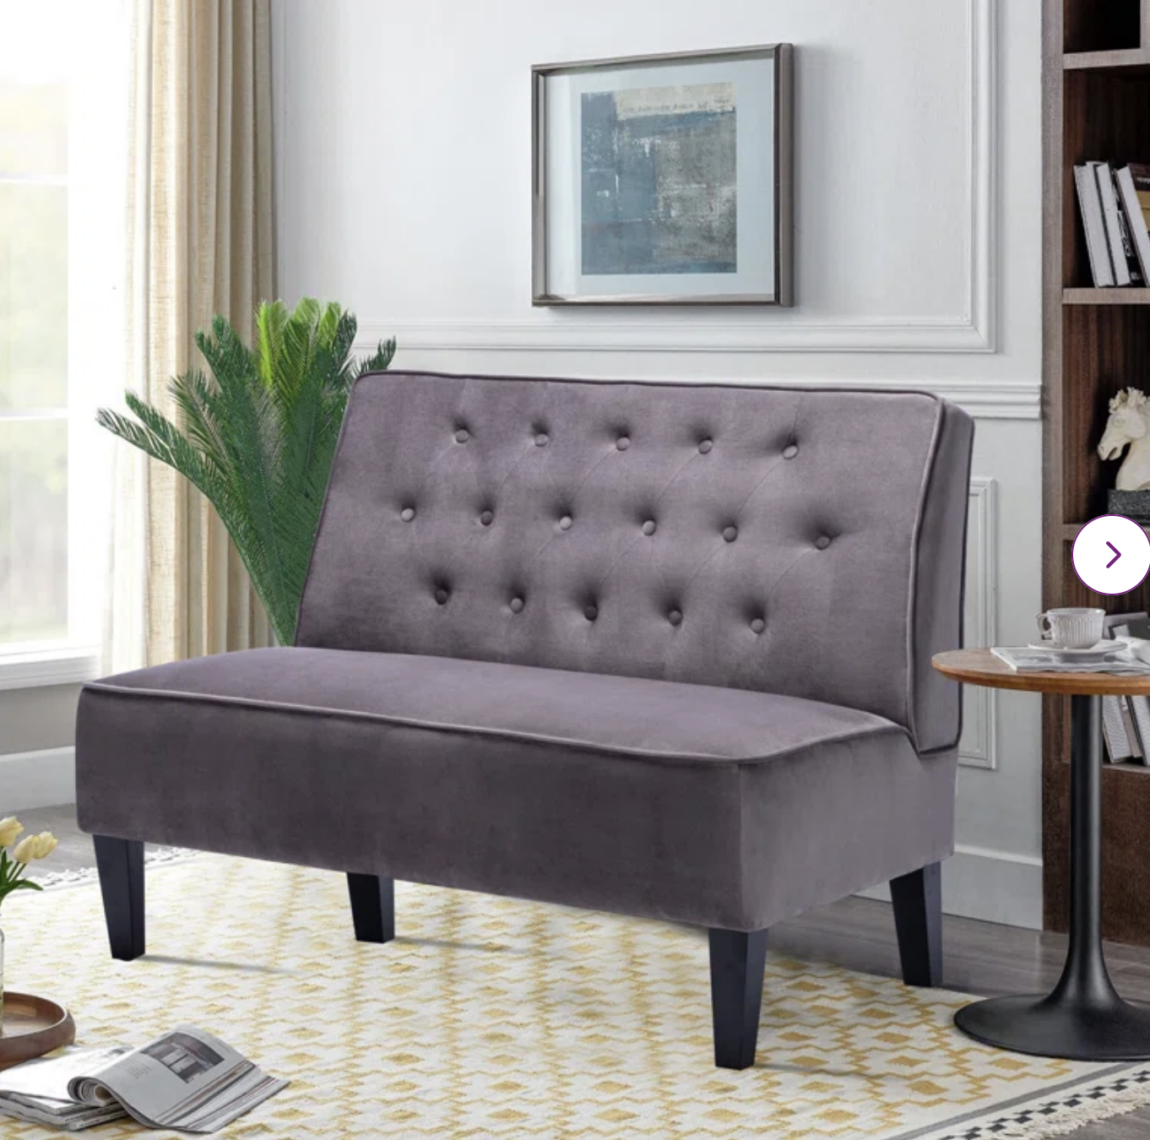 The Best Rated Sofas Under $300! I love finding great deals on furniture, especially for the renters out there. I decided working on an extremely low budget of $300 or less would be a great idea to help some out there that don't have a lot of money to throw at furniture like a sofa. I sure didn't when I was in my first apartment.